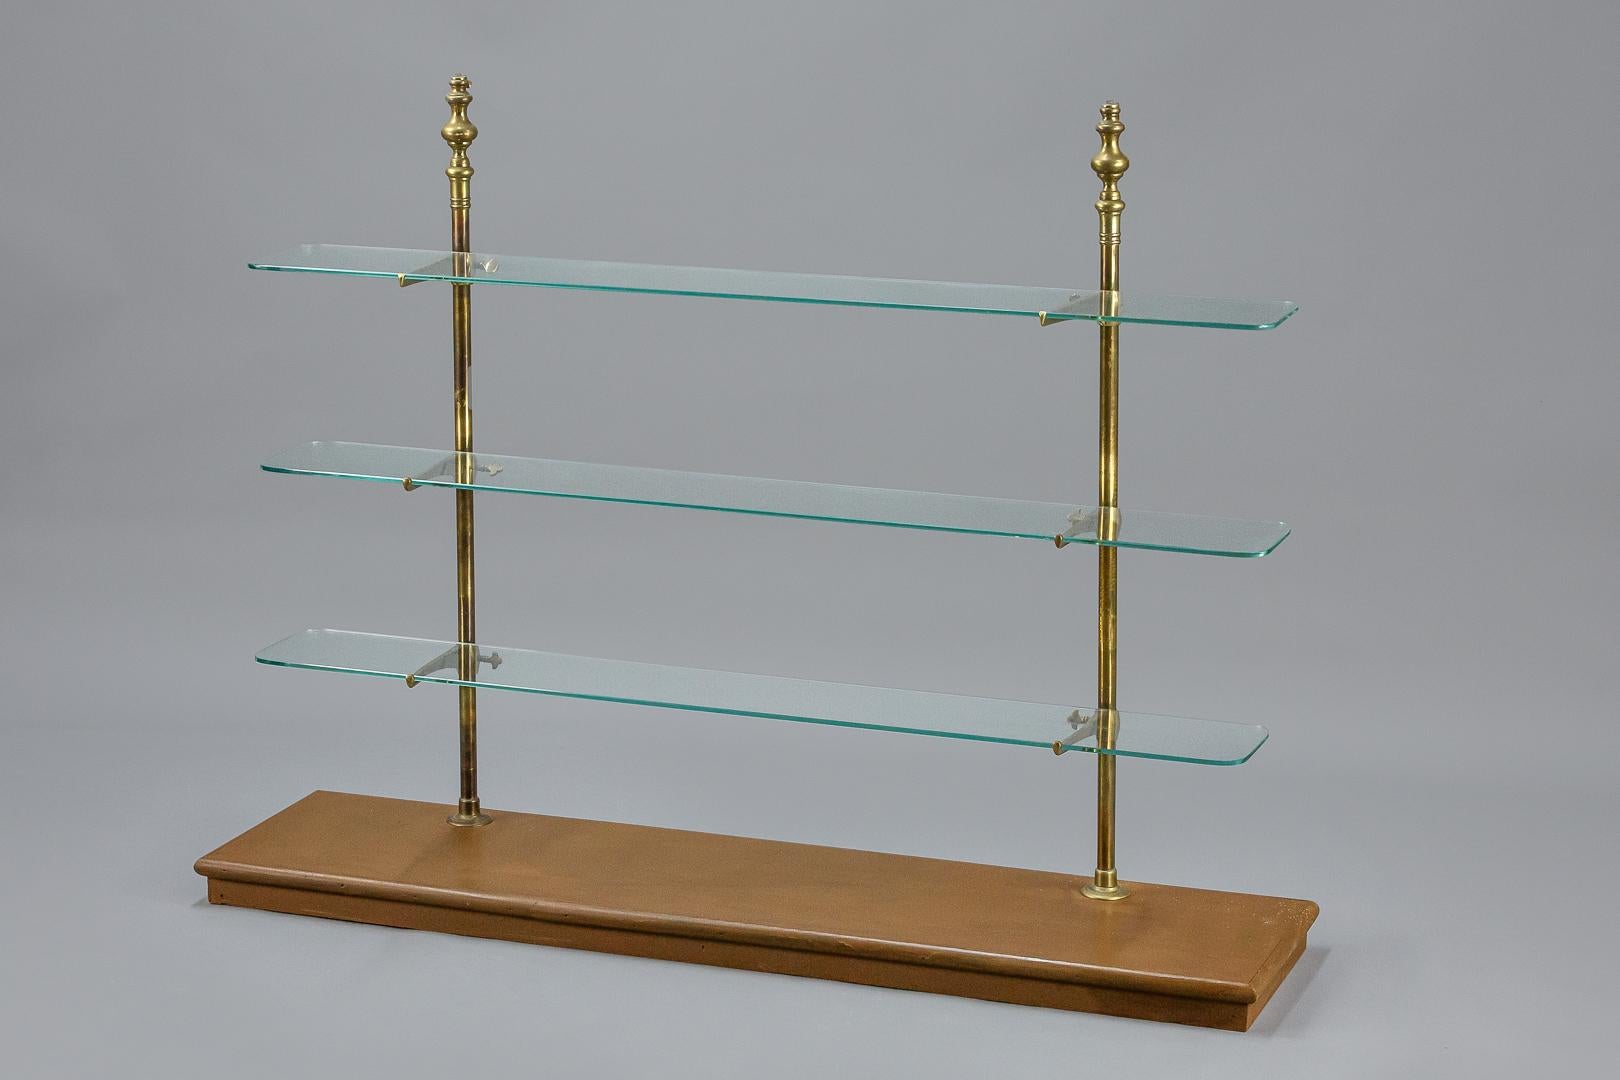 Brass and glass retail shop display shelving, mounted on a later wooden painted base, glass all present with no damage, later fixing points added to the top of each brass pillar. France circa 1920 and later (base)
Dimensions: 130cm x 100cm x 33cm.